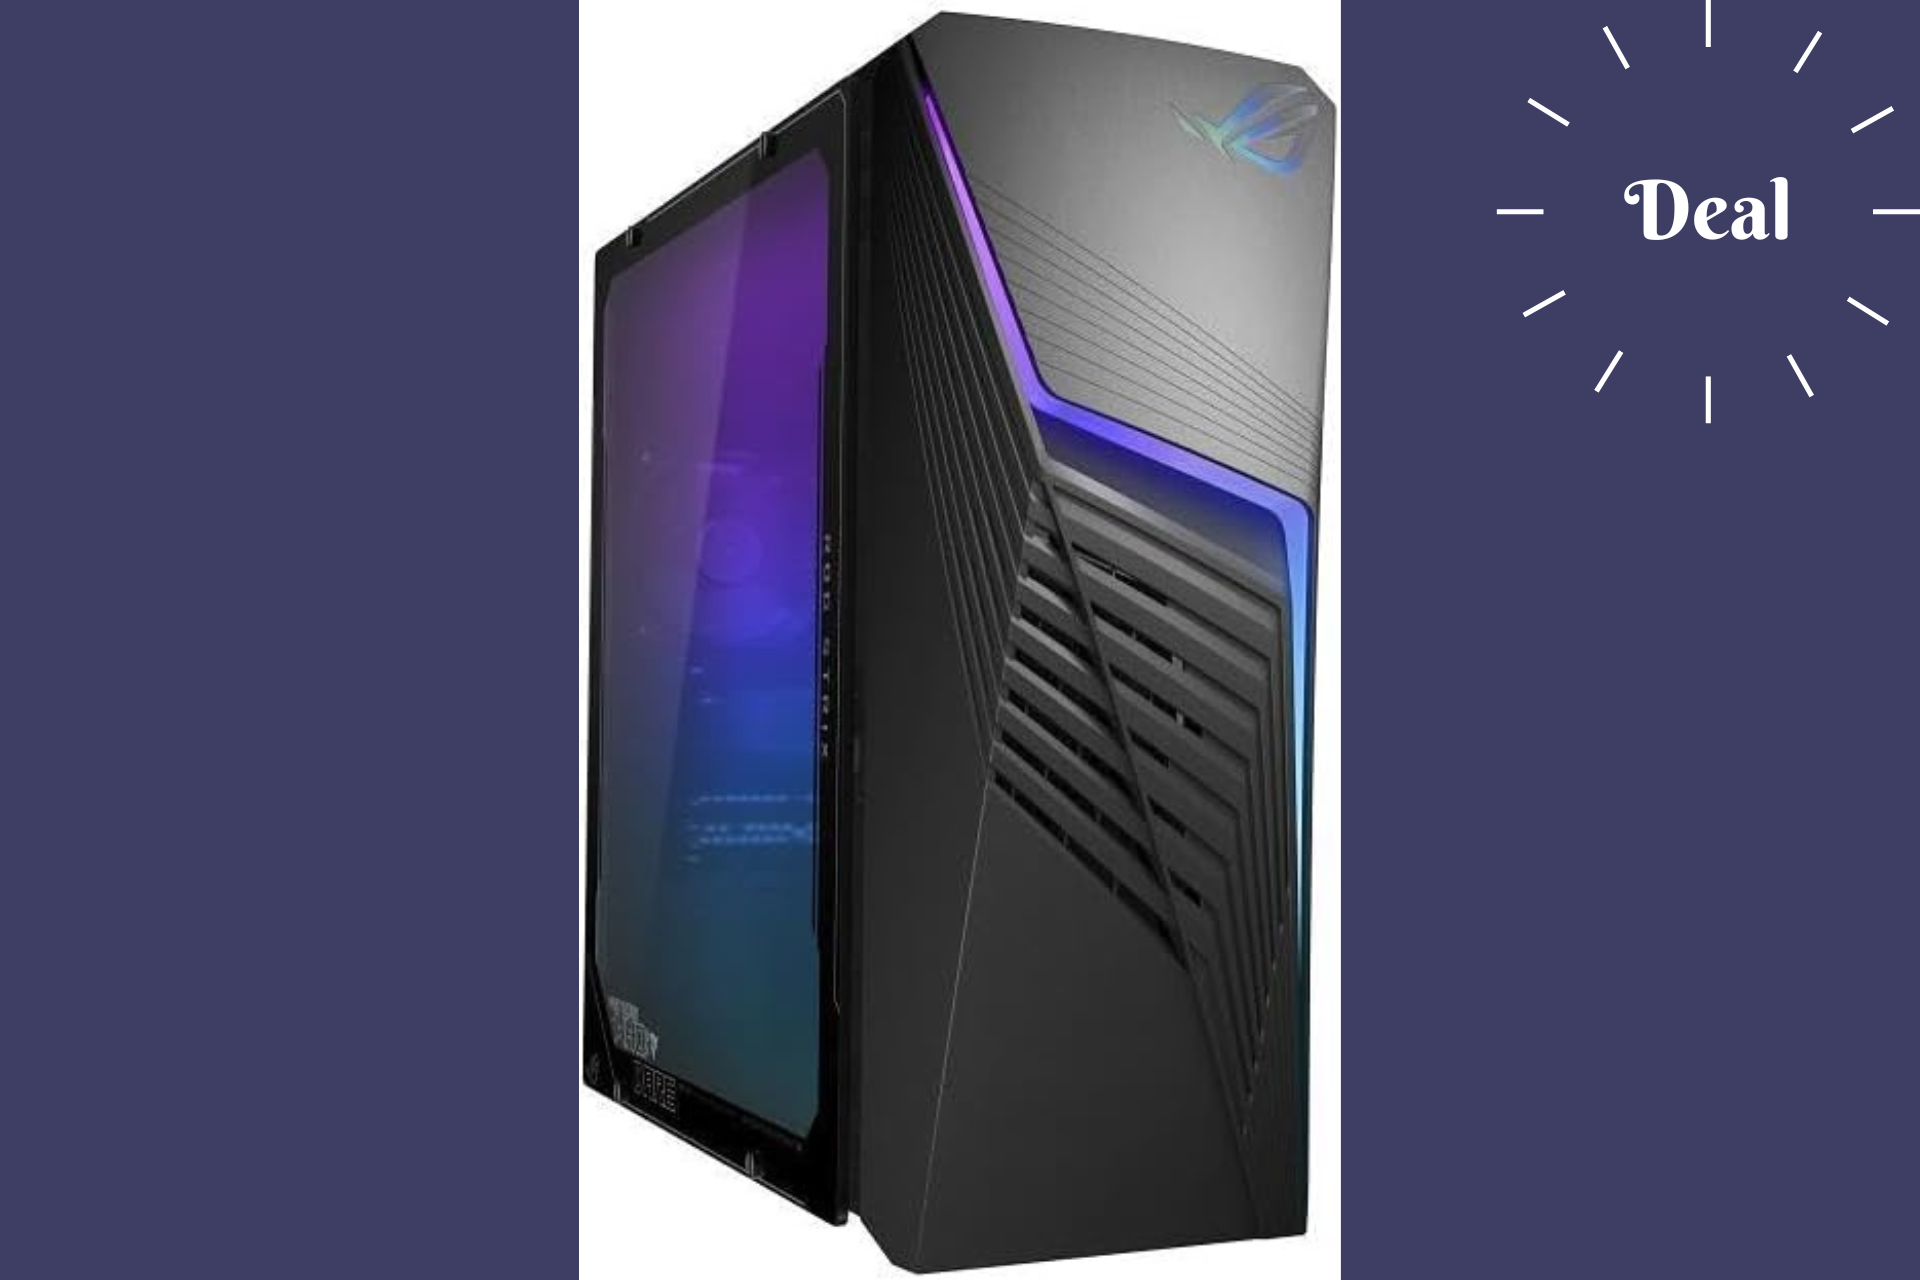 ASUS ROG G13CH 2023 gaming PC Amazon deal